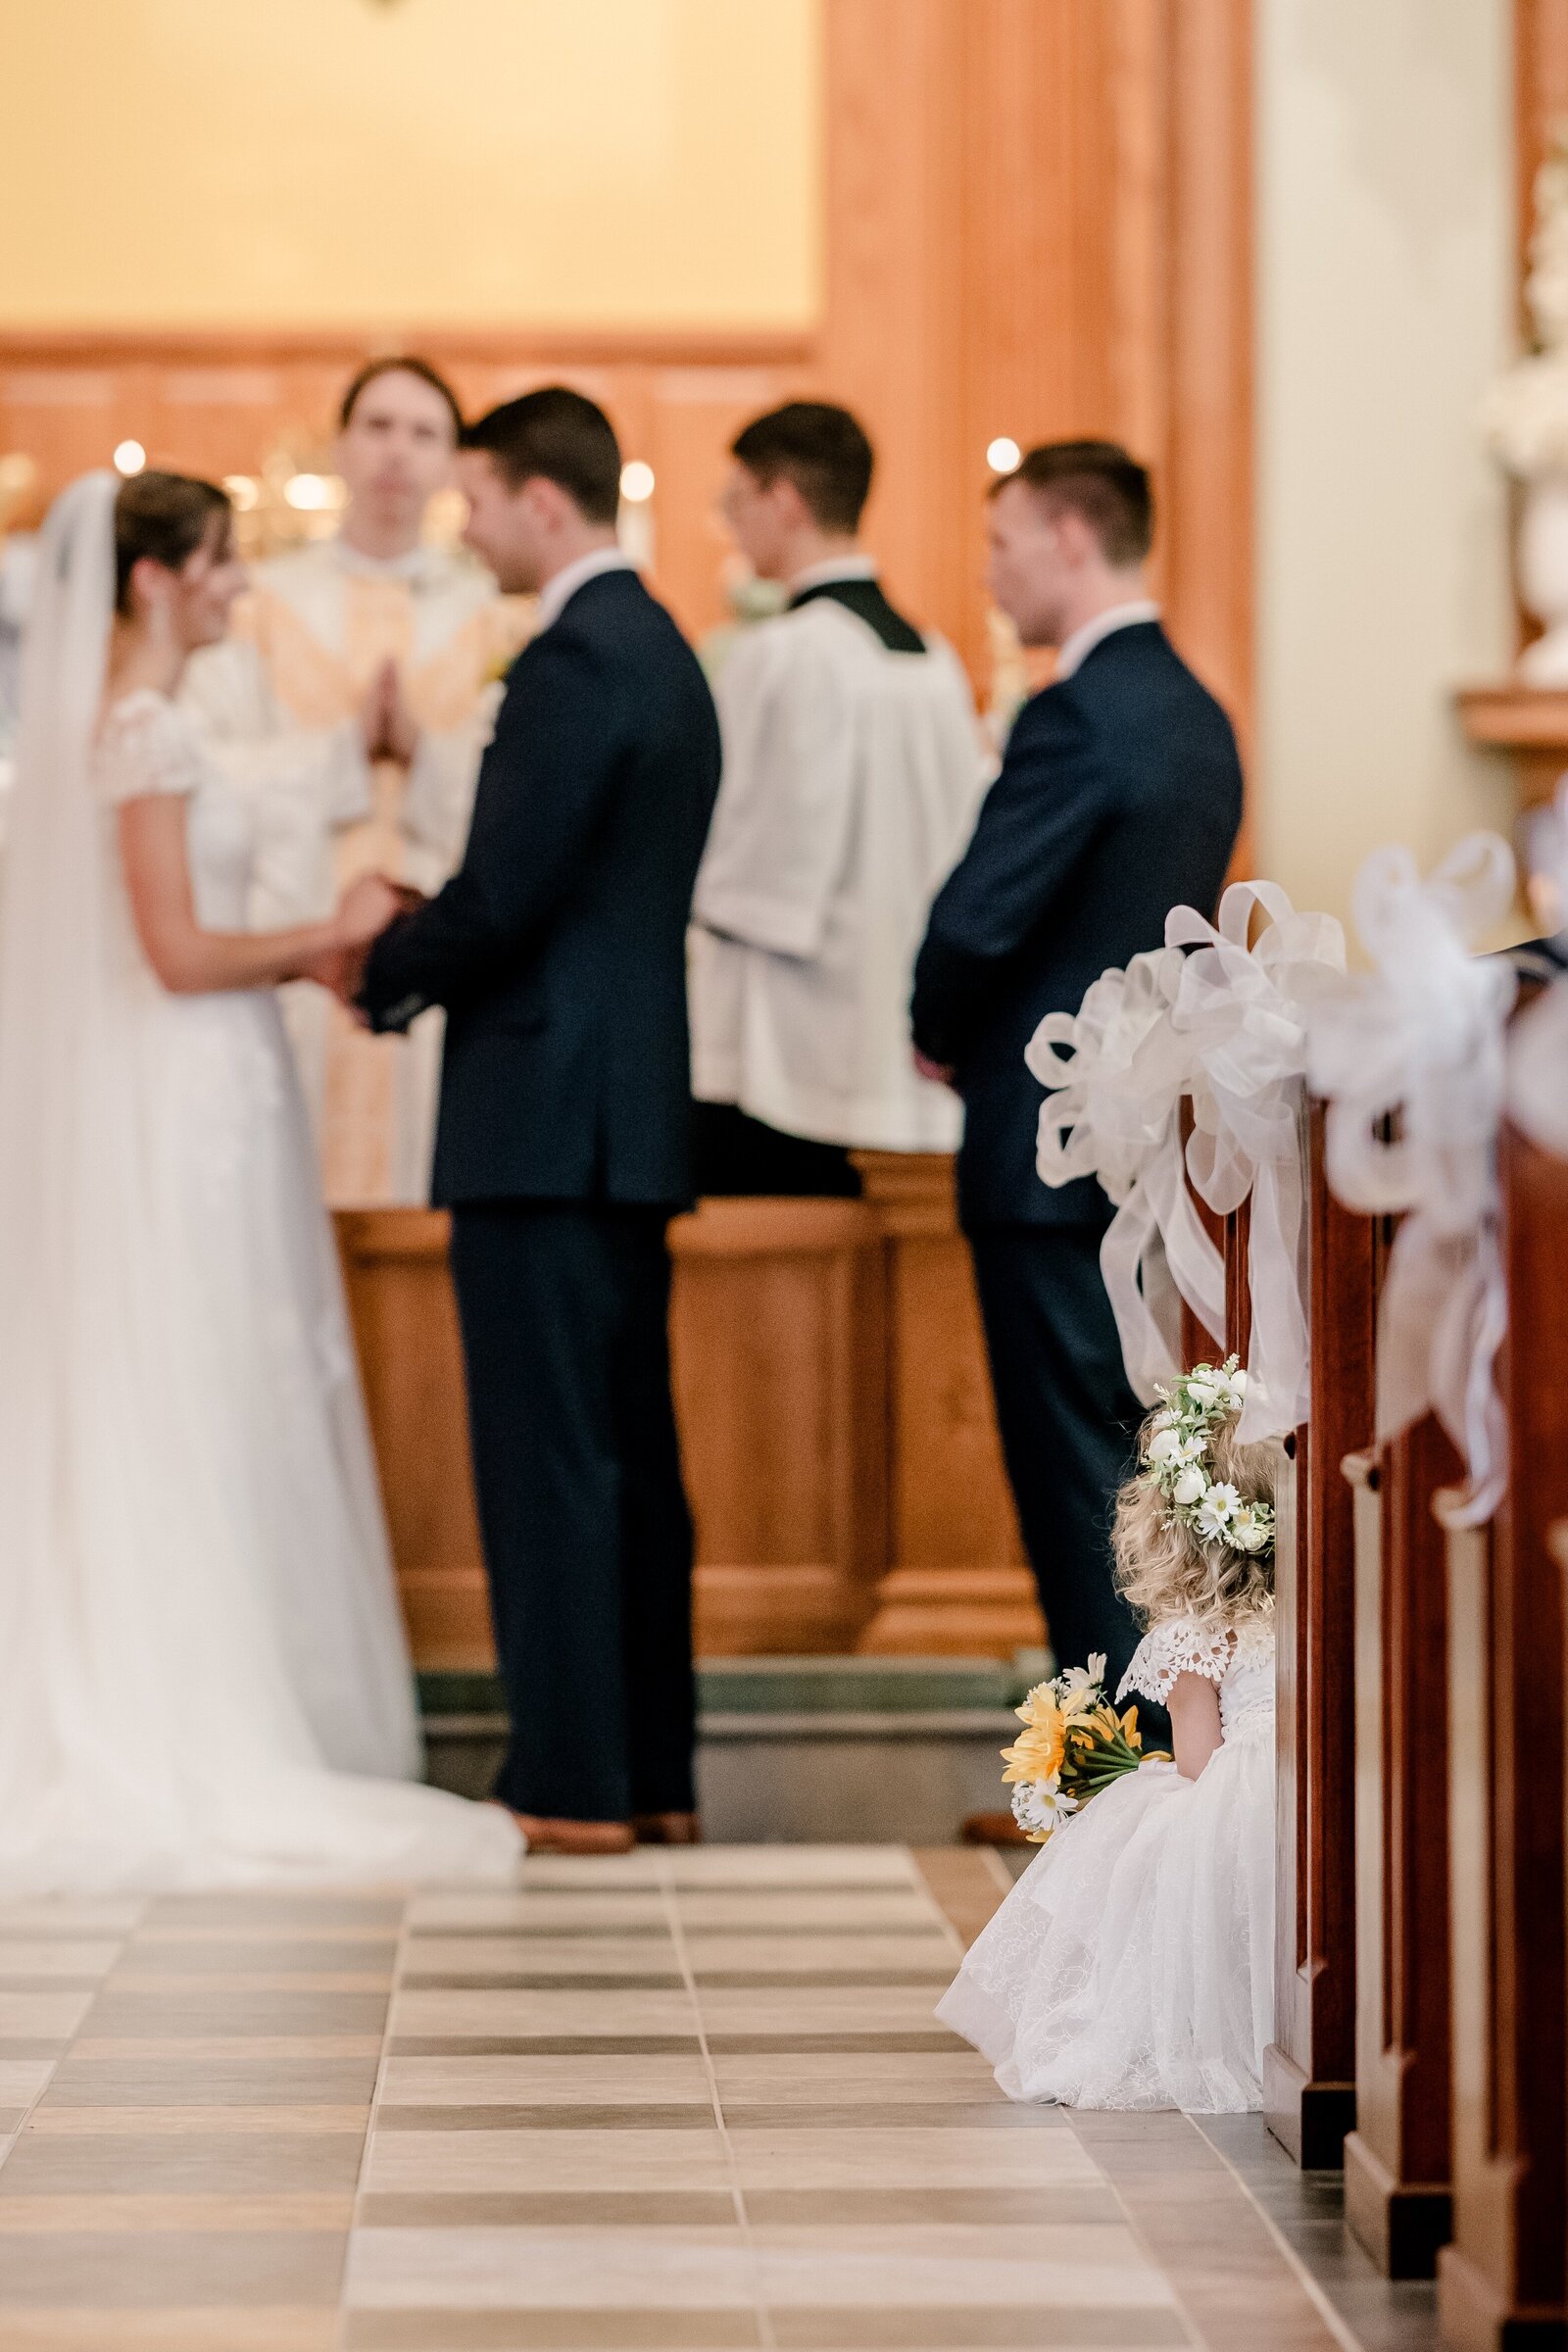 A flower girl peeking out into the aisle during a Catholic wedding in Northern Virginia